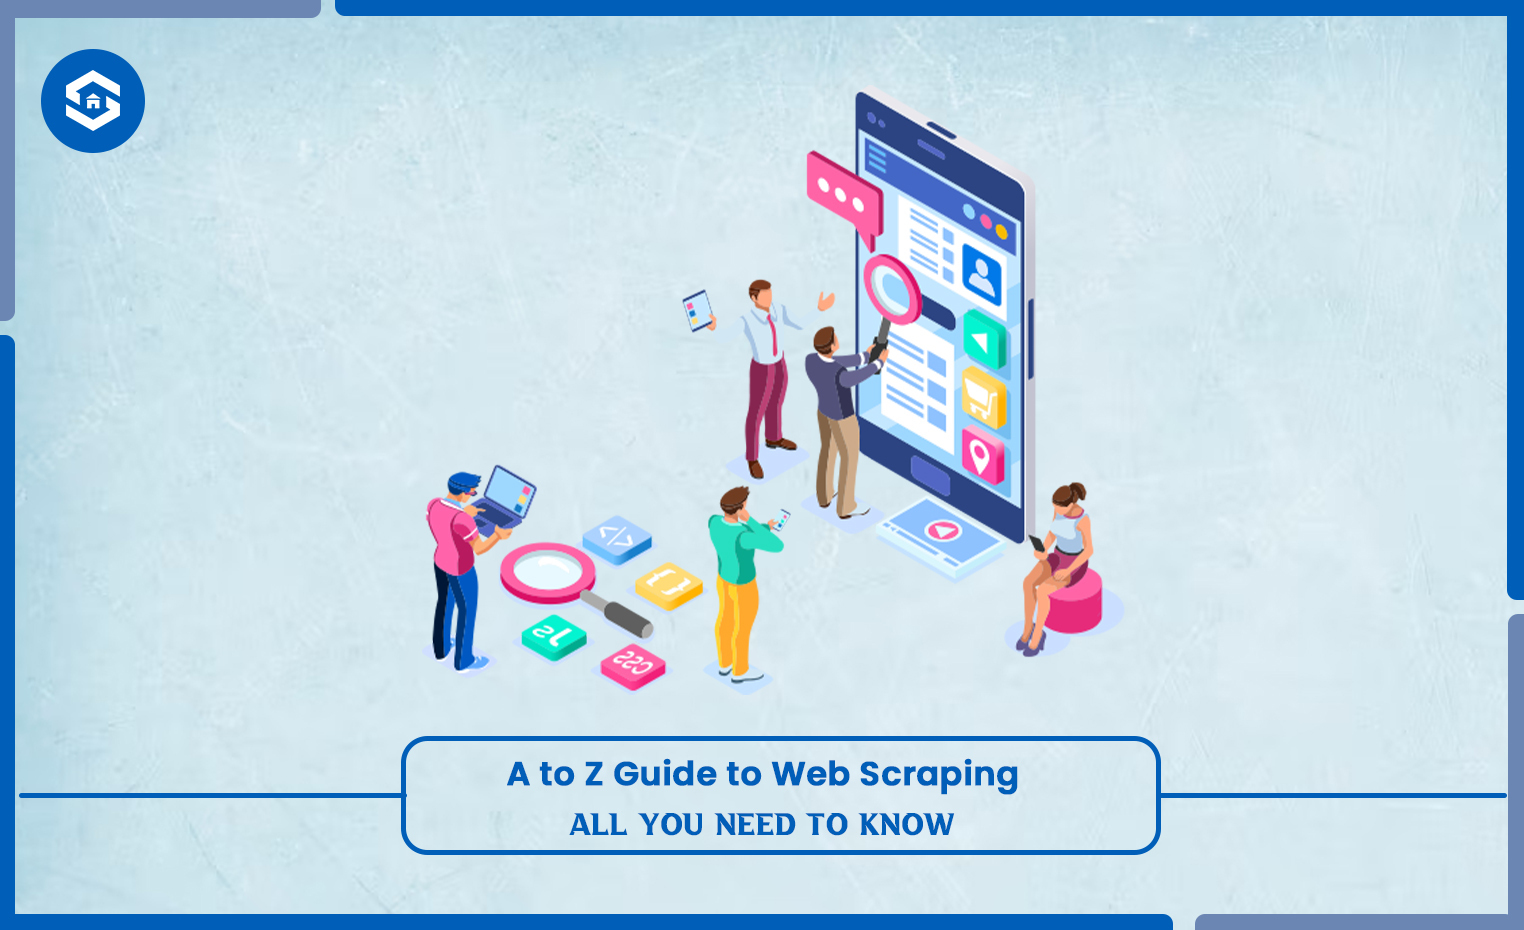 A to Z Guide to Web Scraping